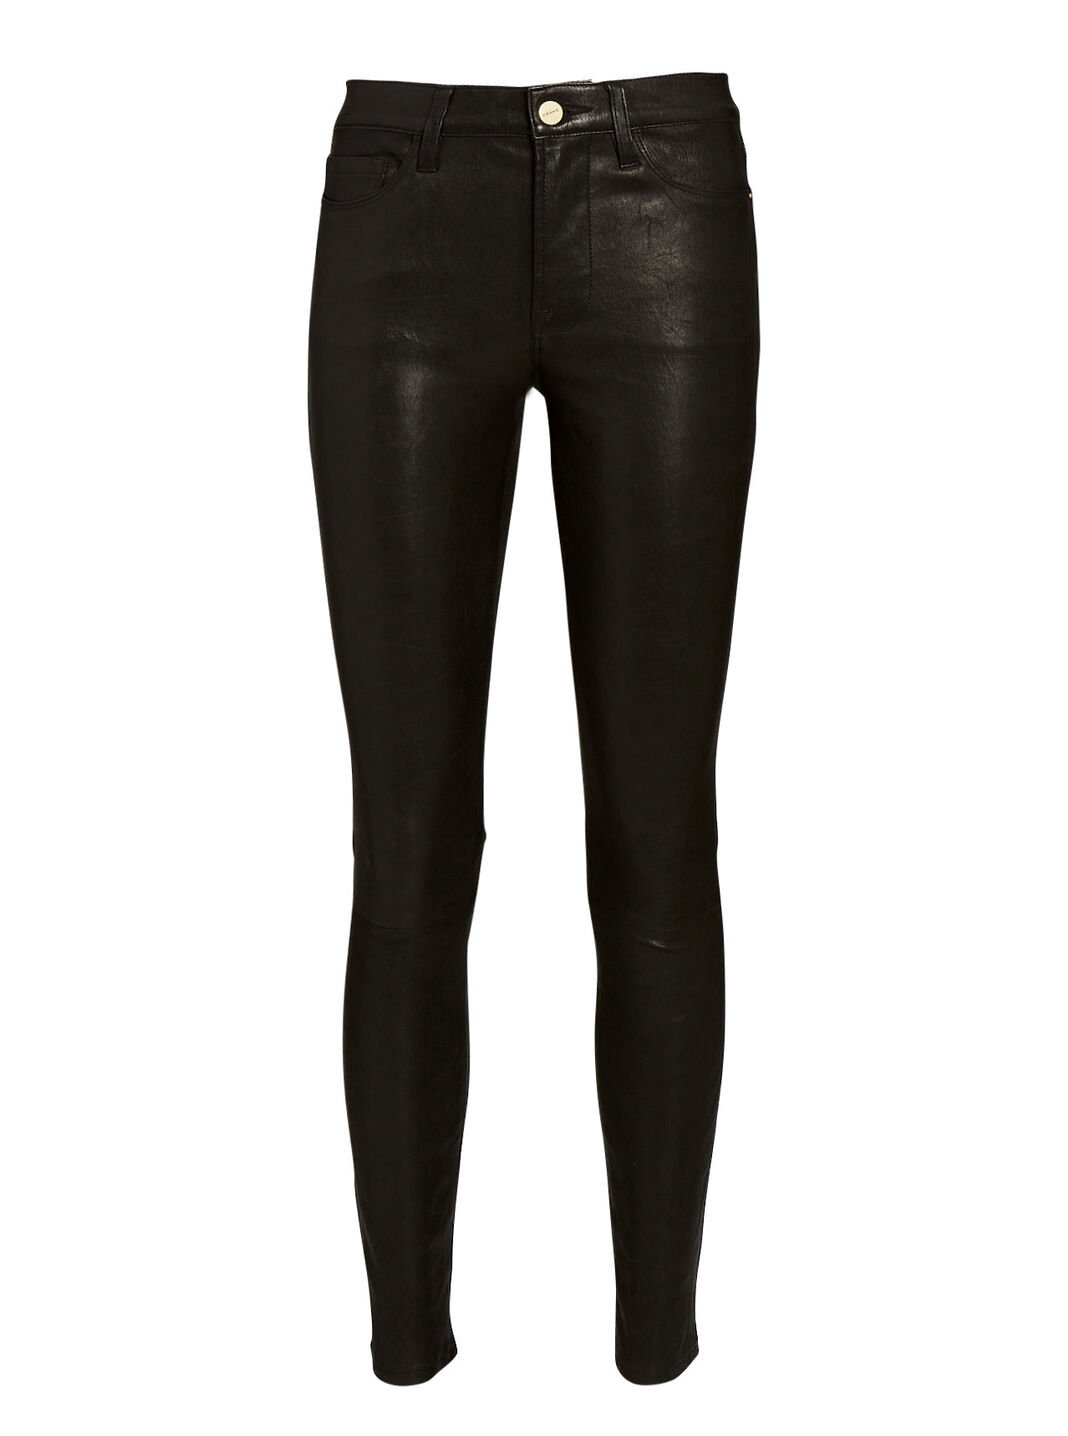 Le High Skinny Leather Pants